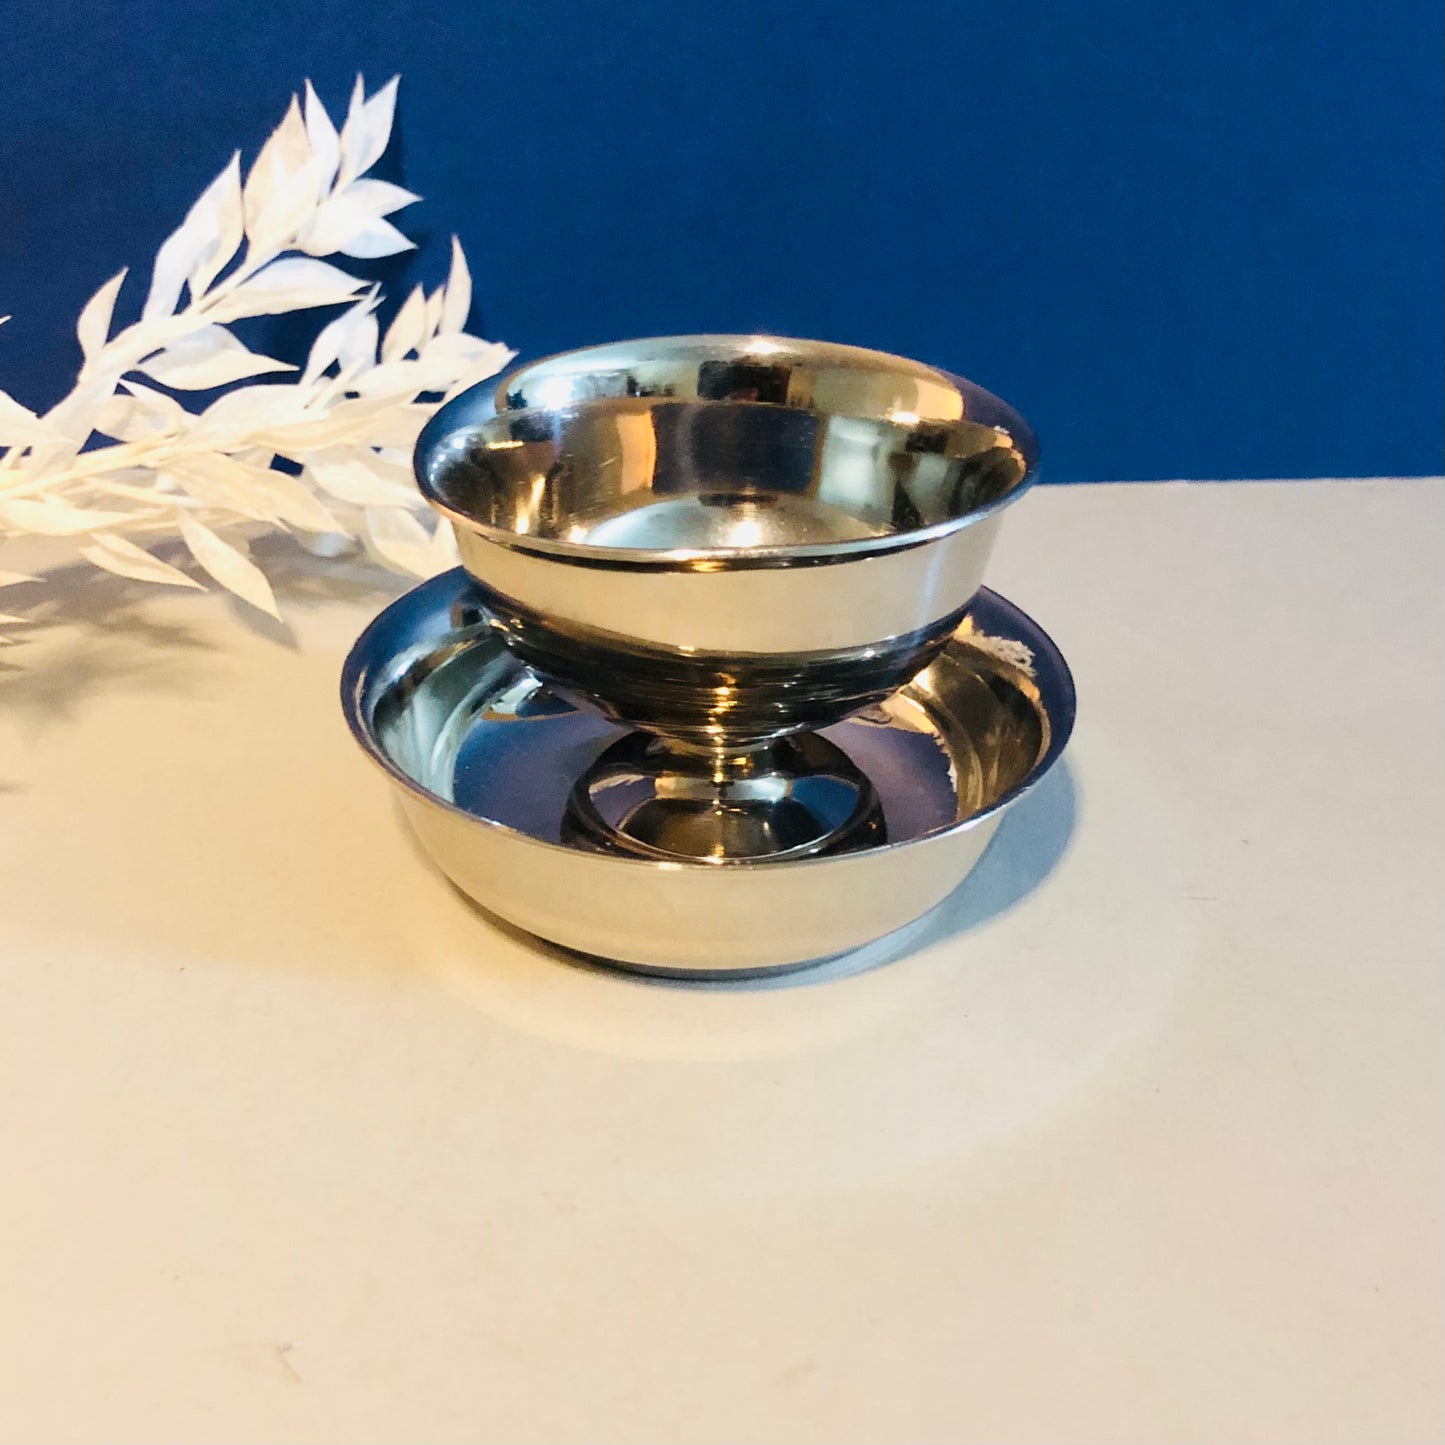 Religious Last Rites Silver Dishes | Vintage Tea Lights Candle Holder